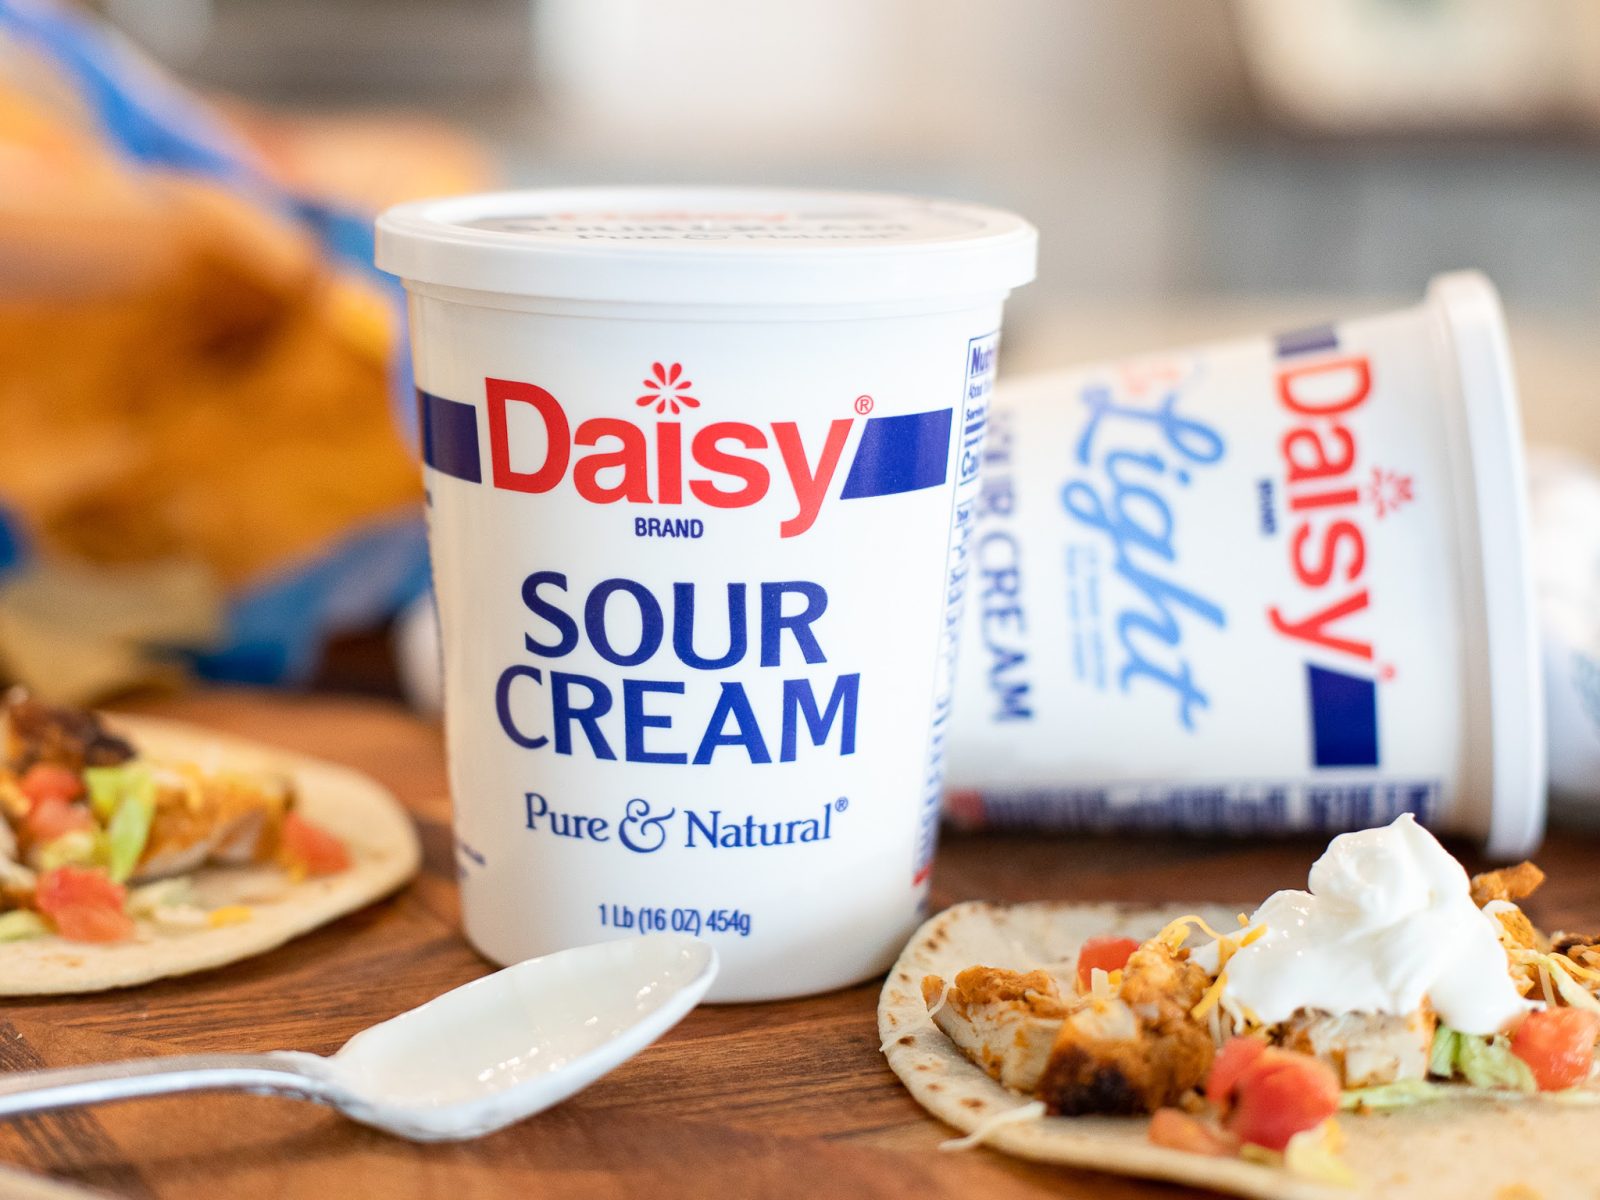 Get Daisy Sour Cream For Just $2.79 At Kroger